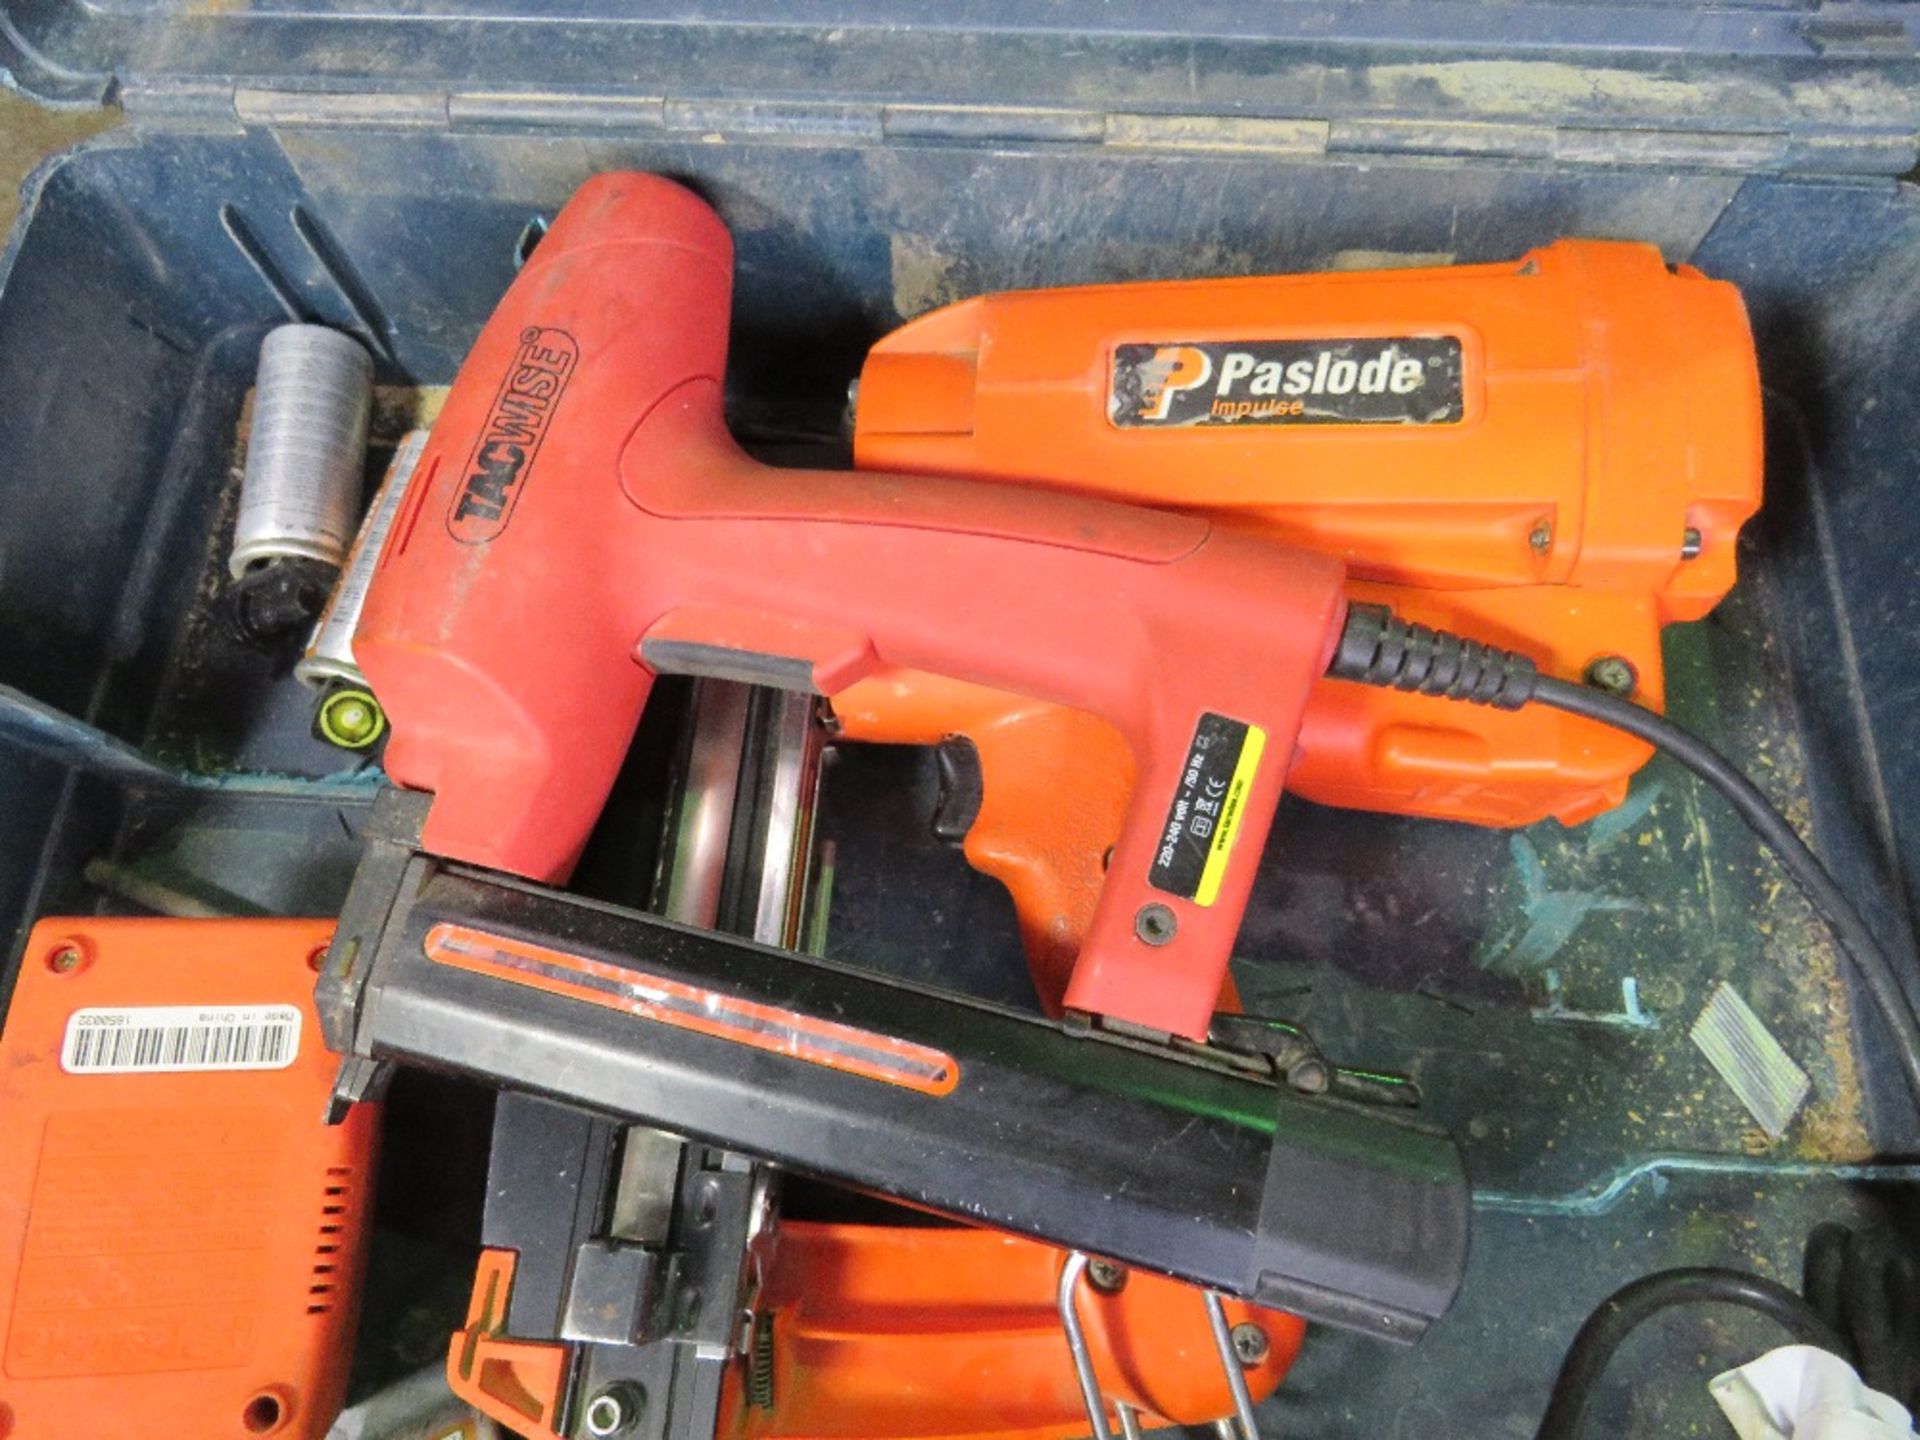 PASLODE SECOND FIX NAIL GUN PLUS MAINS BRAD NAILER. SOLD UNDER THE AUCTIONEERS MARGIN SCHEME THEREFO - Image 2 of 2